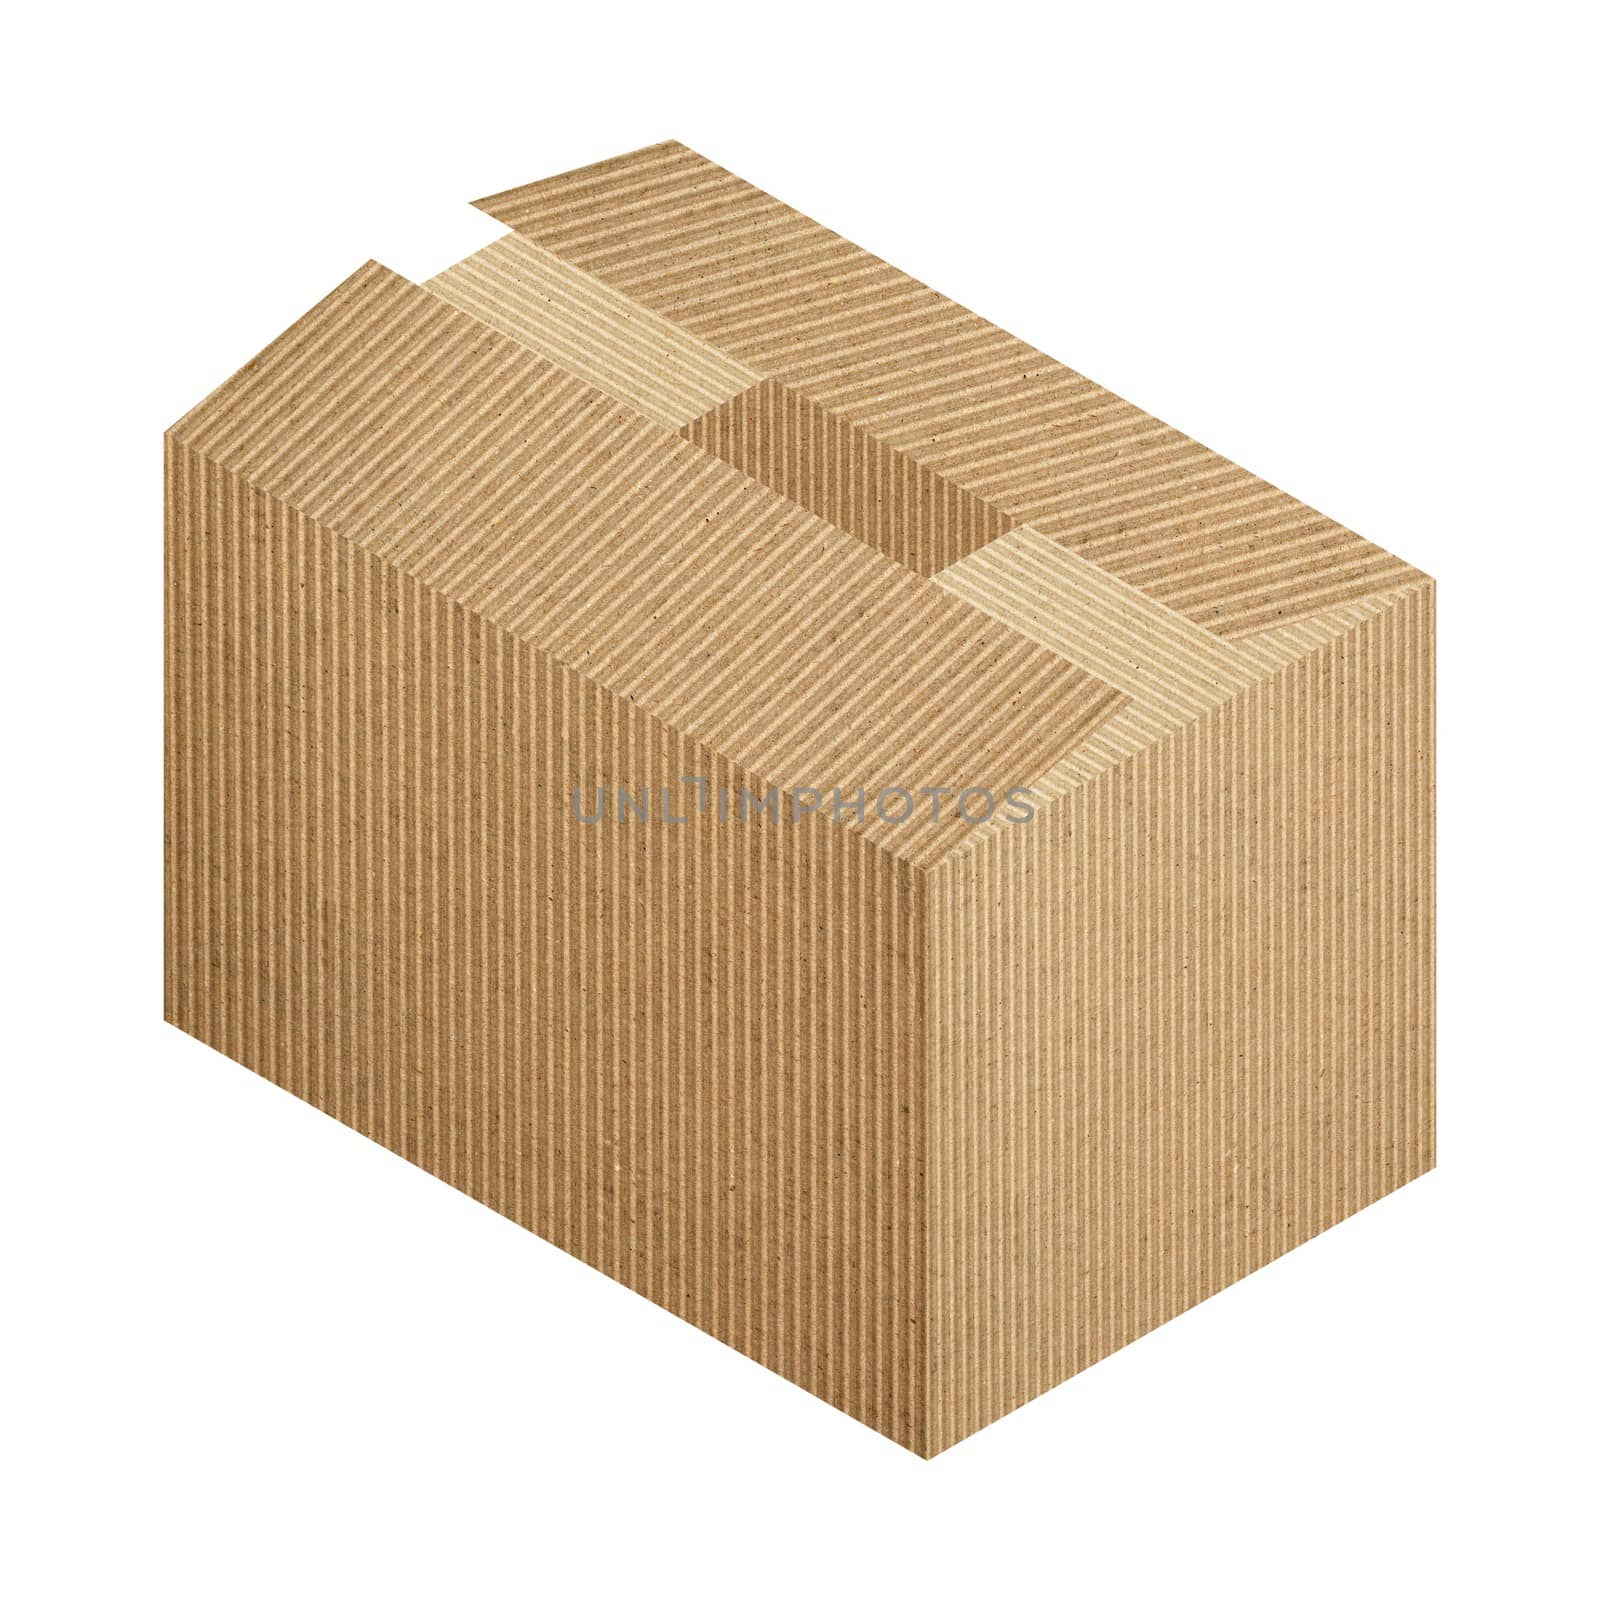 brown corrugated cardboard packet isolated over white background